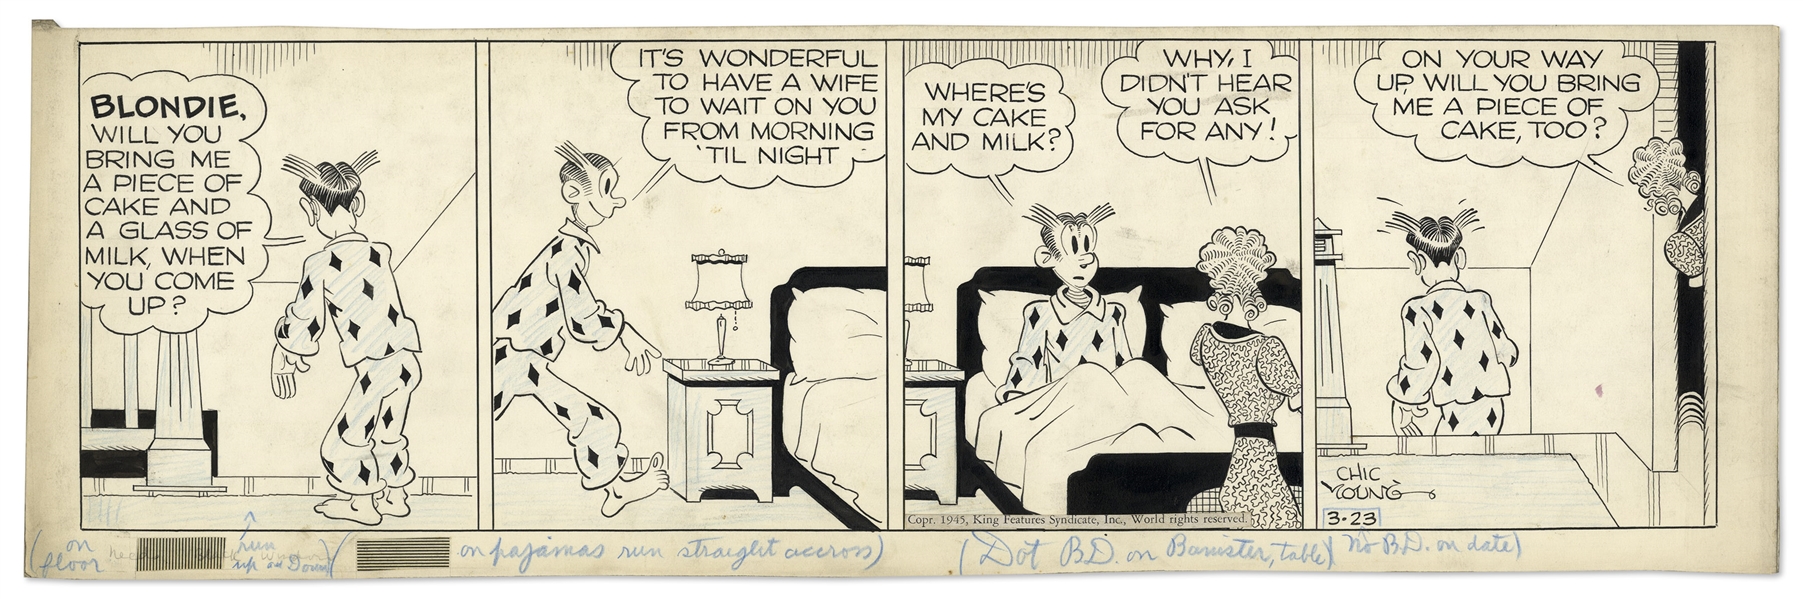 Chic Young Hand-Drawn ''Blondie'' Comic Strip From 1945 Featuring Blondie & Dagwood -- Titled, ''Self Service''